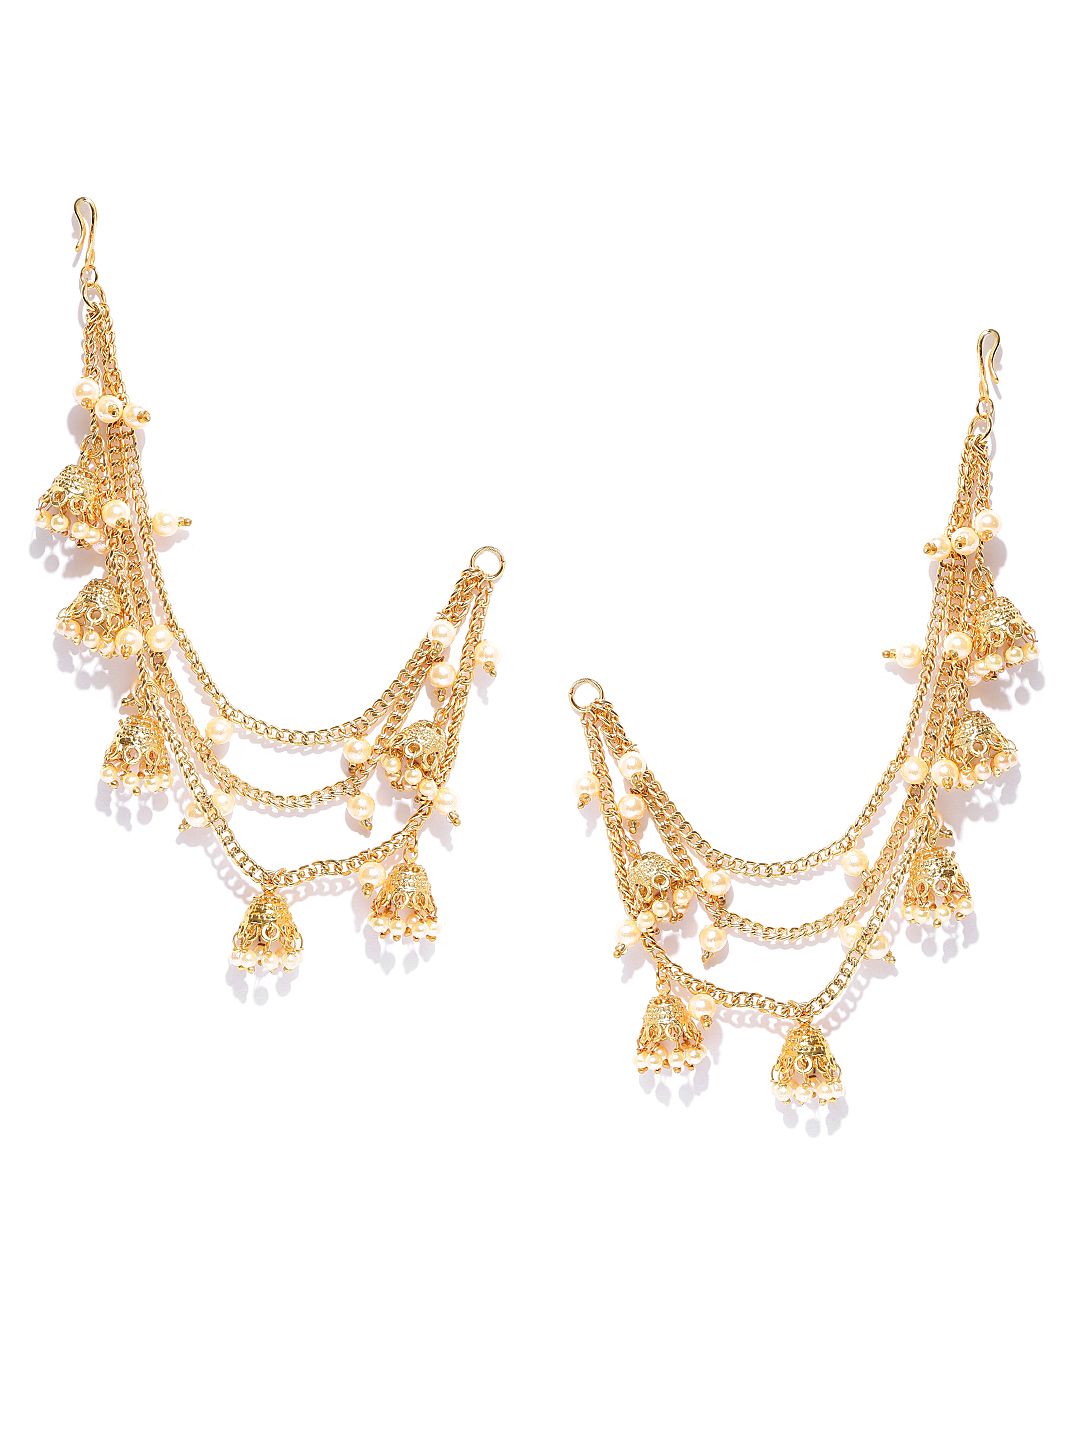 YouBella Cream-Coloured Gold-Plated Beaded Ear Chains Price in India